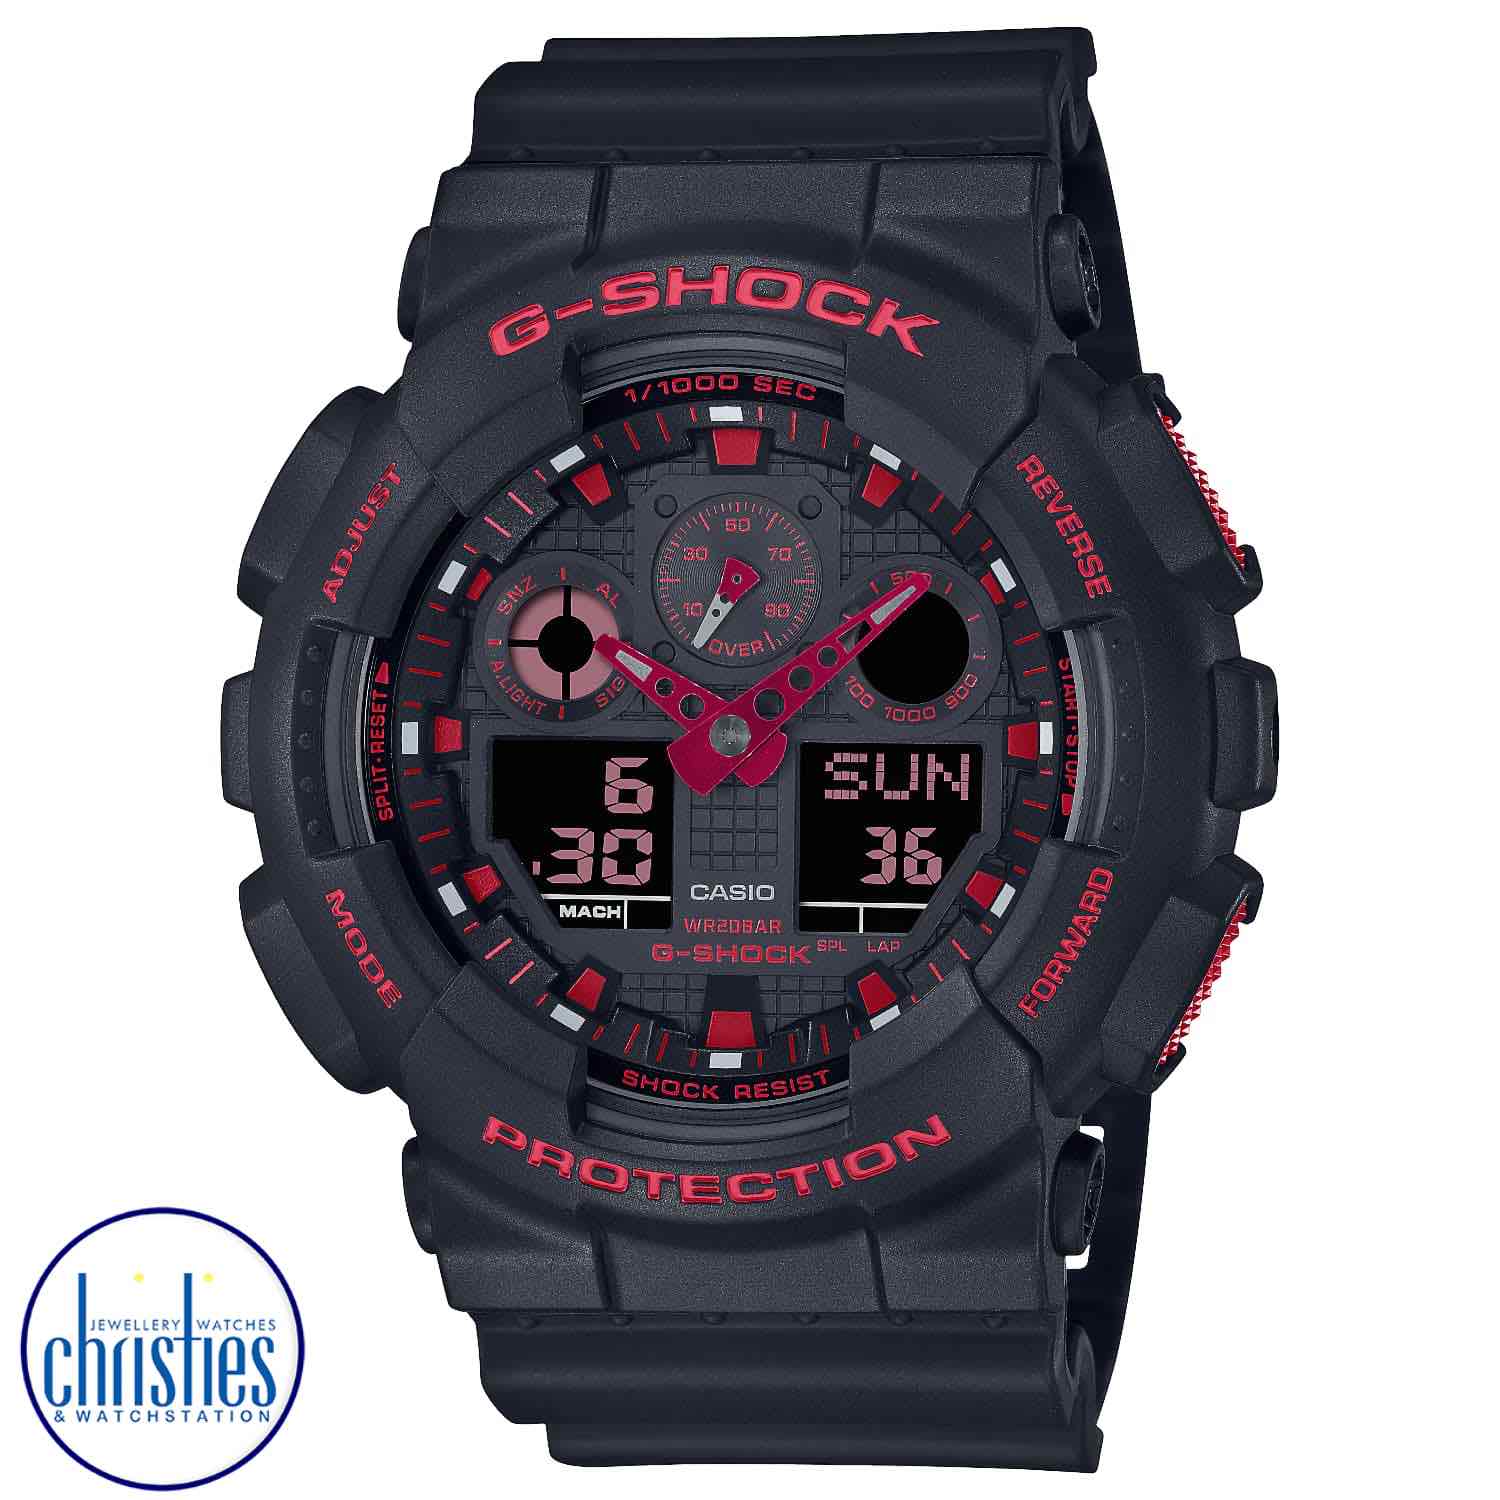 GA100BNR-1A G-Shock Worldtime Watch. Make a bold, powerful statement with the Ignite Red line in the iconic black and fiery red that embodies the ultimate toughness of the G-SHOCK brand. g shock watches price